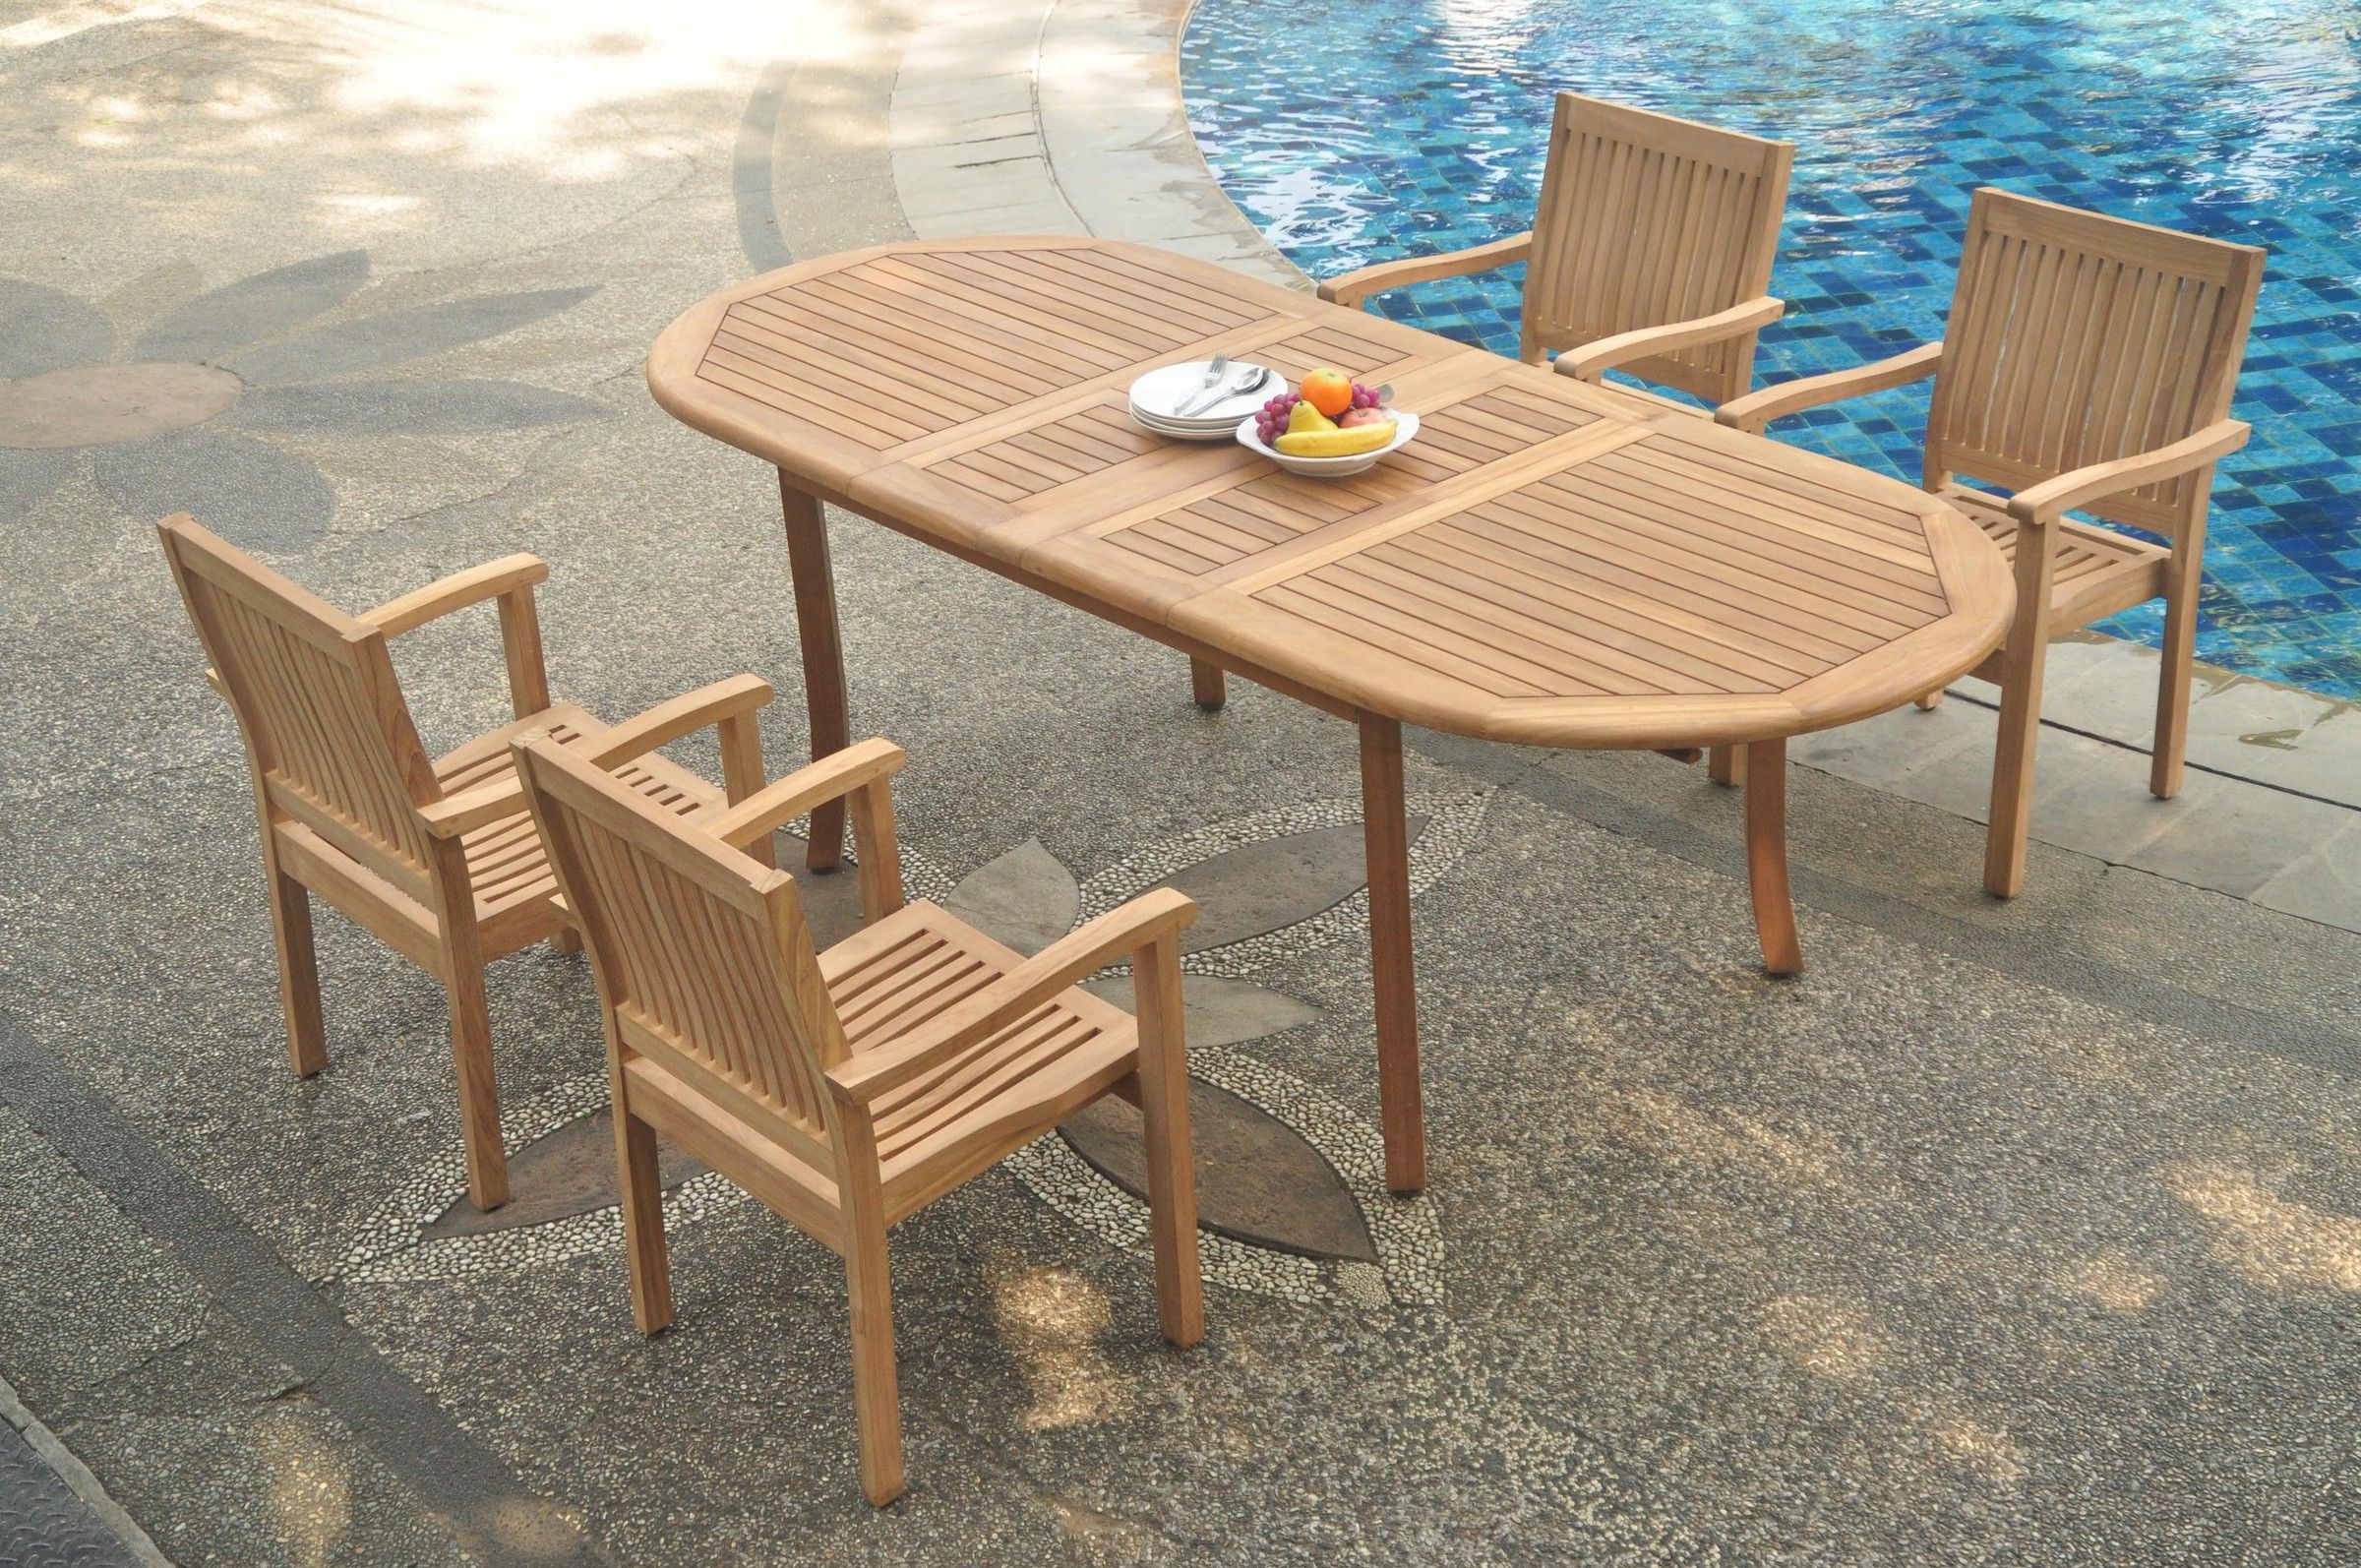 Grade A Teak Dining Set: 4 Seater 5 Pc: 94" Double Extension Oval Table With Newest Teak Folding Chair Patio Dining Sets (View 1 of 15)